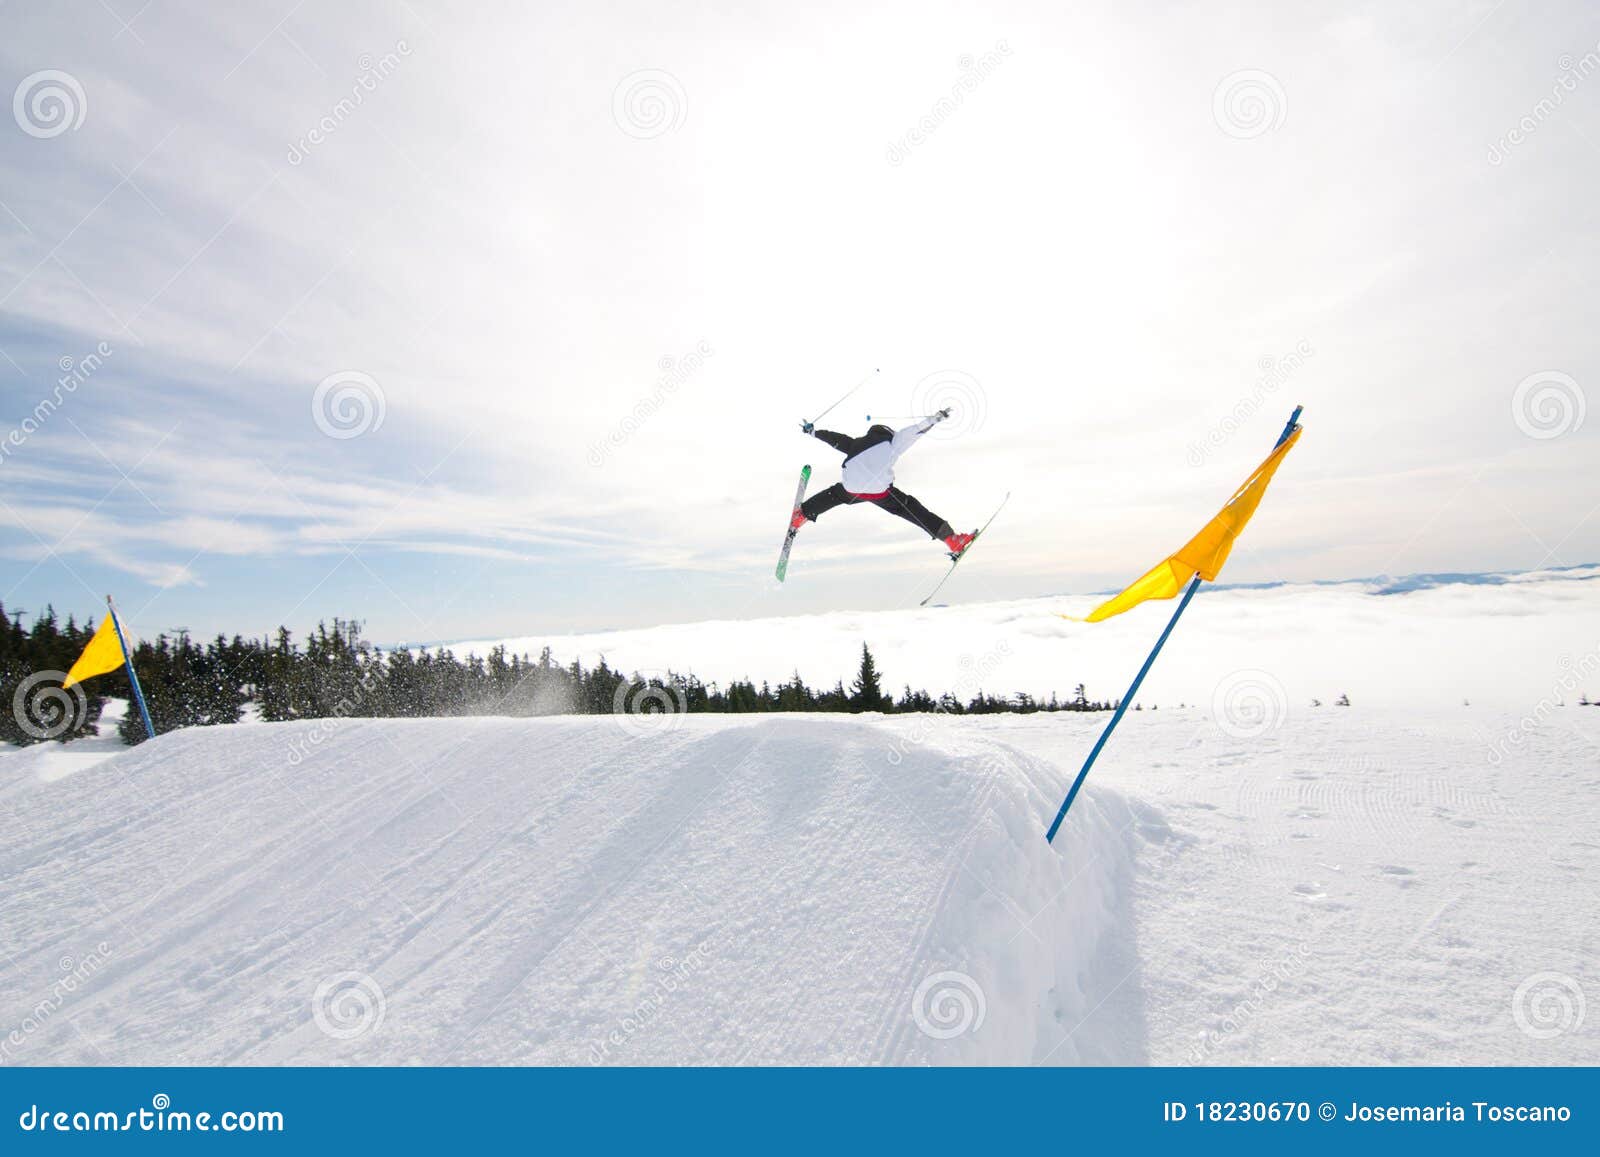 male skier catches big air.